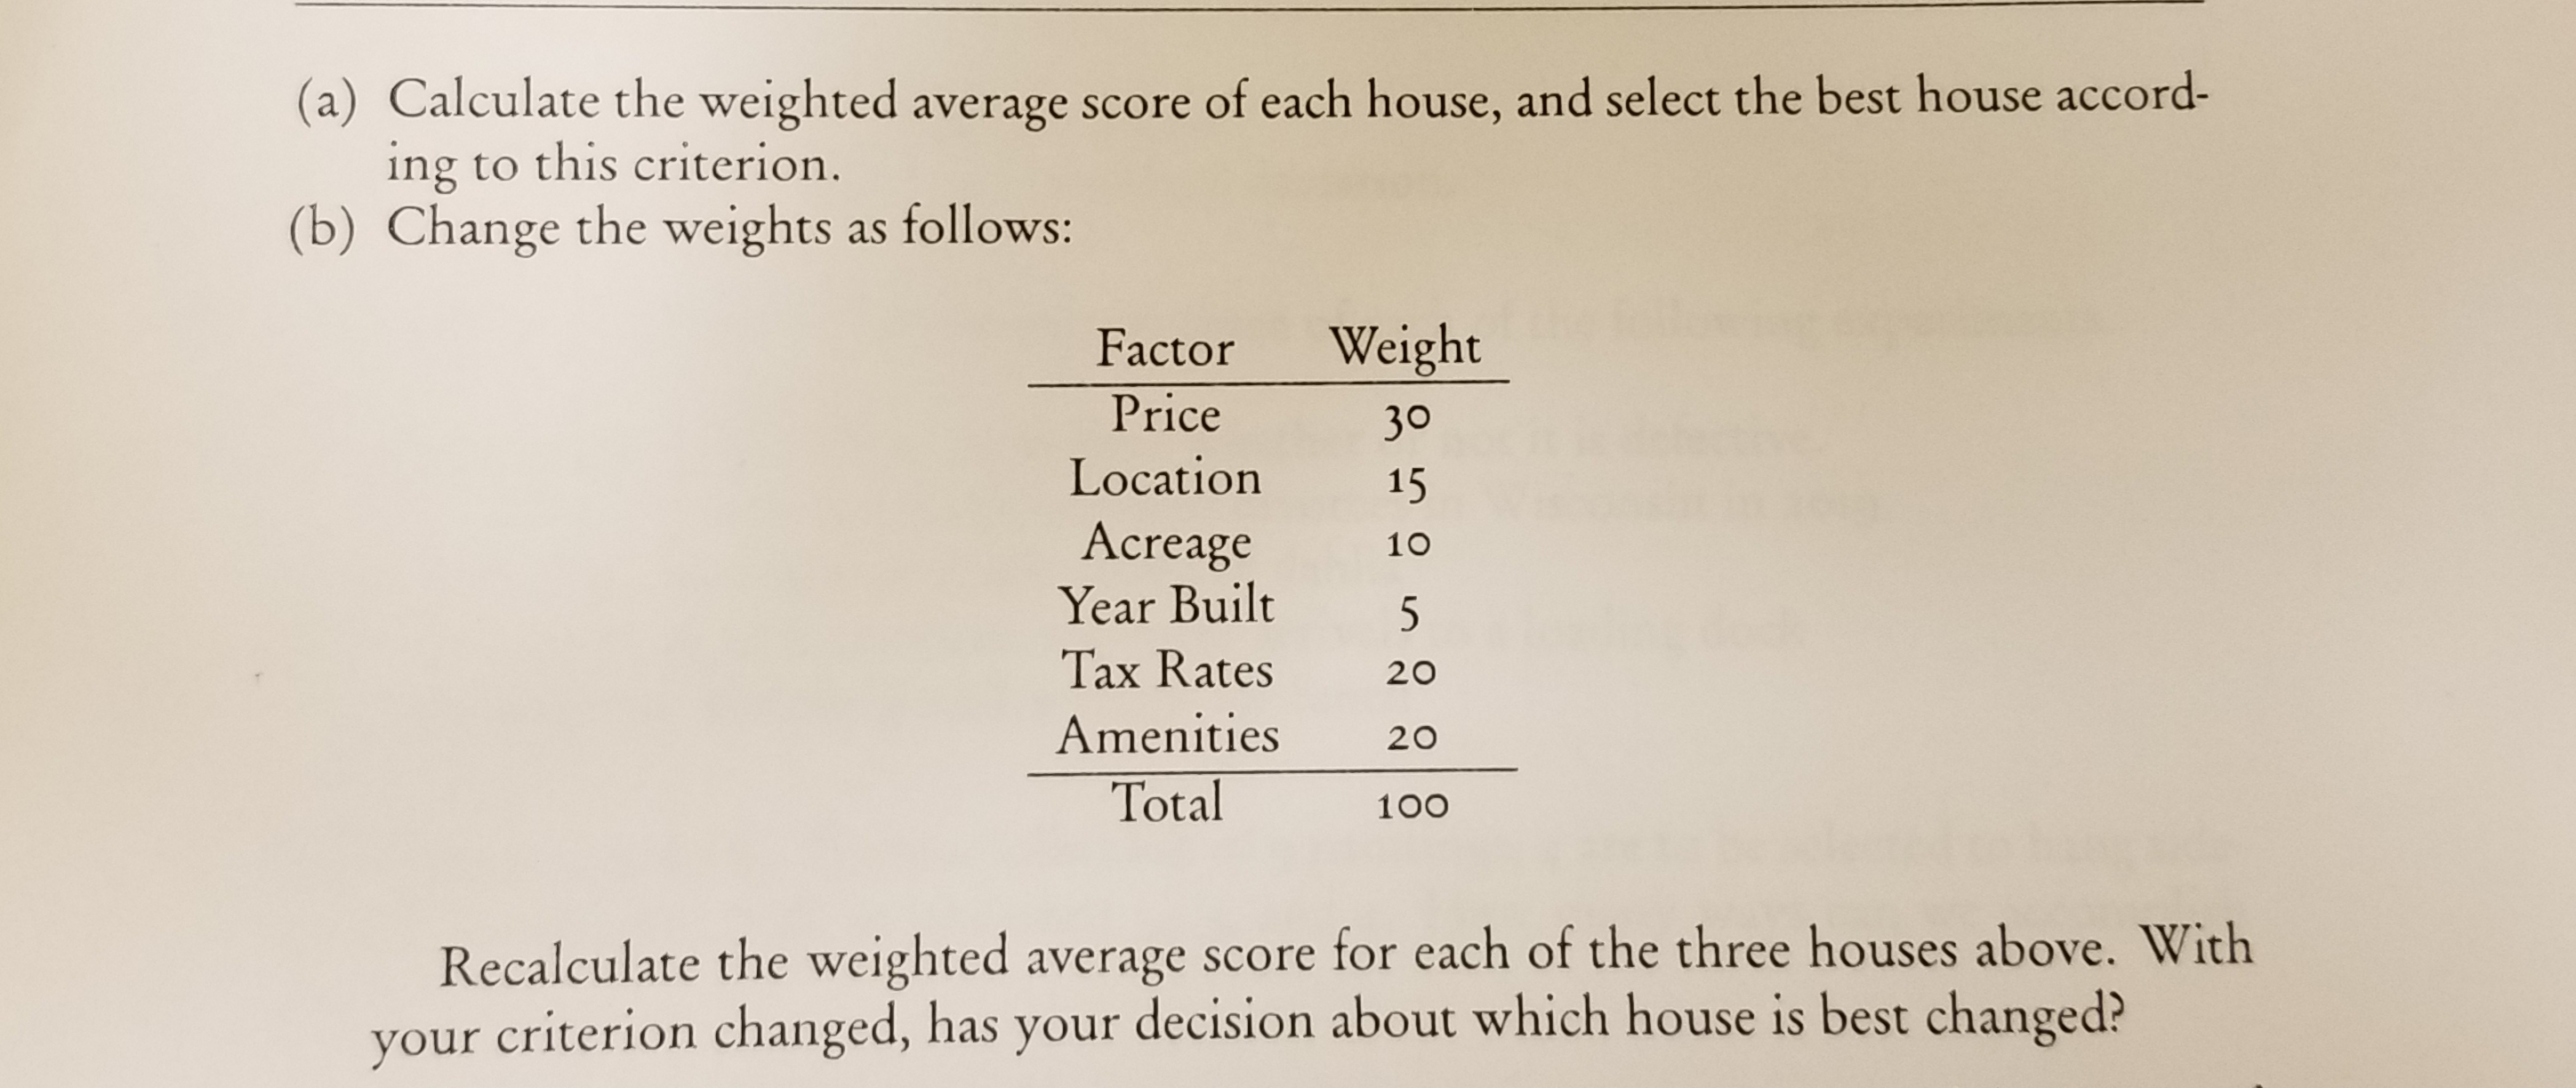 (a) Calculate the weighted average score of each house, and select the best house accord-
ing to this criterion.
(b) Change the weights as follows:
Weight
Factor
Price
30
Location
15
Acreage
Year Built
10
Tax Rates
20
Amenities
20
Total
100
Recalculate the weighted average score for each of the three houses above. With
your criterion changed, has your decision about which house is best changed?
